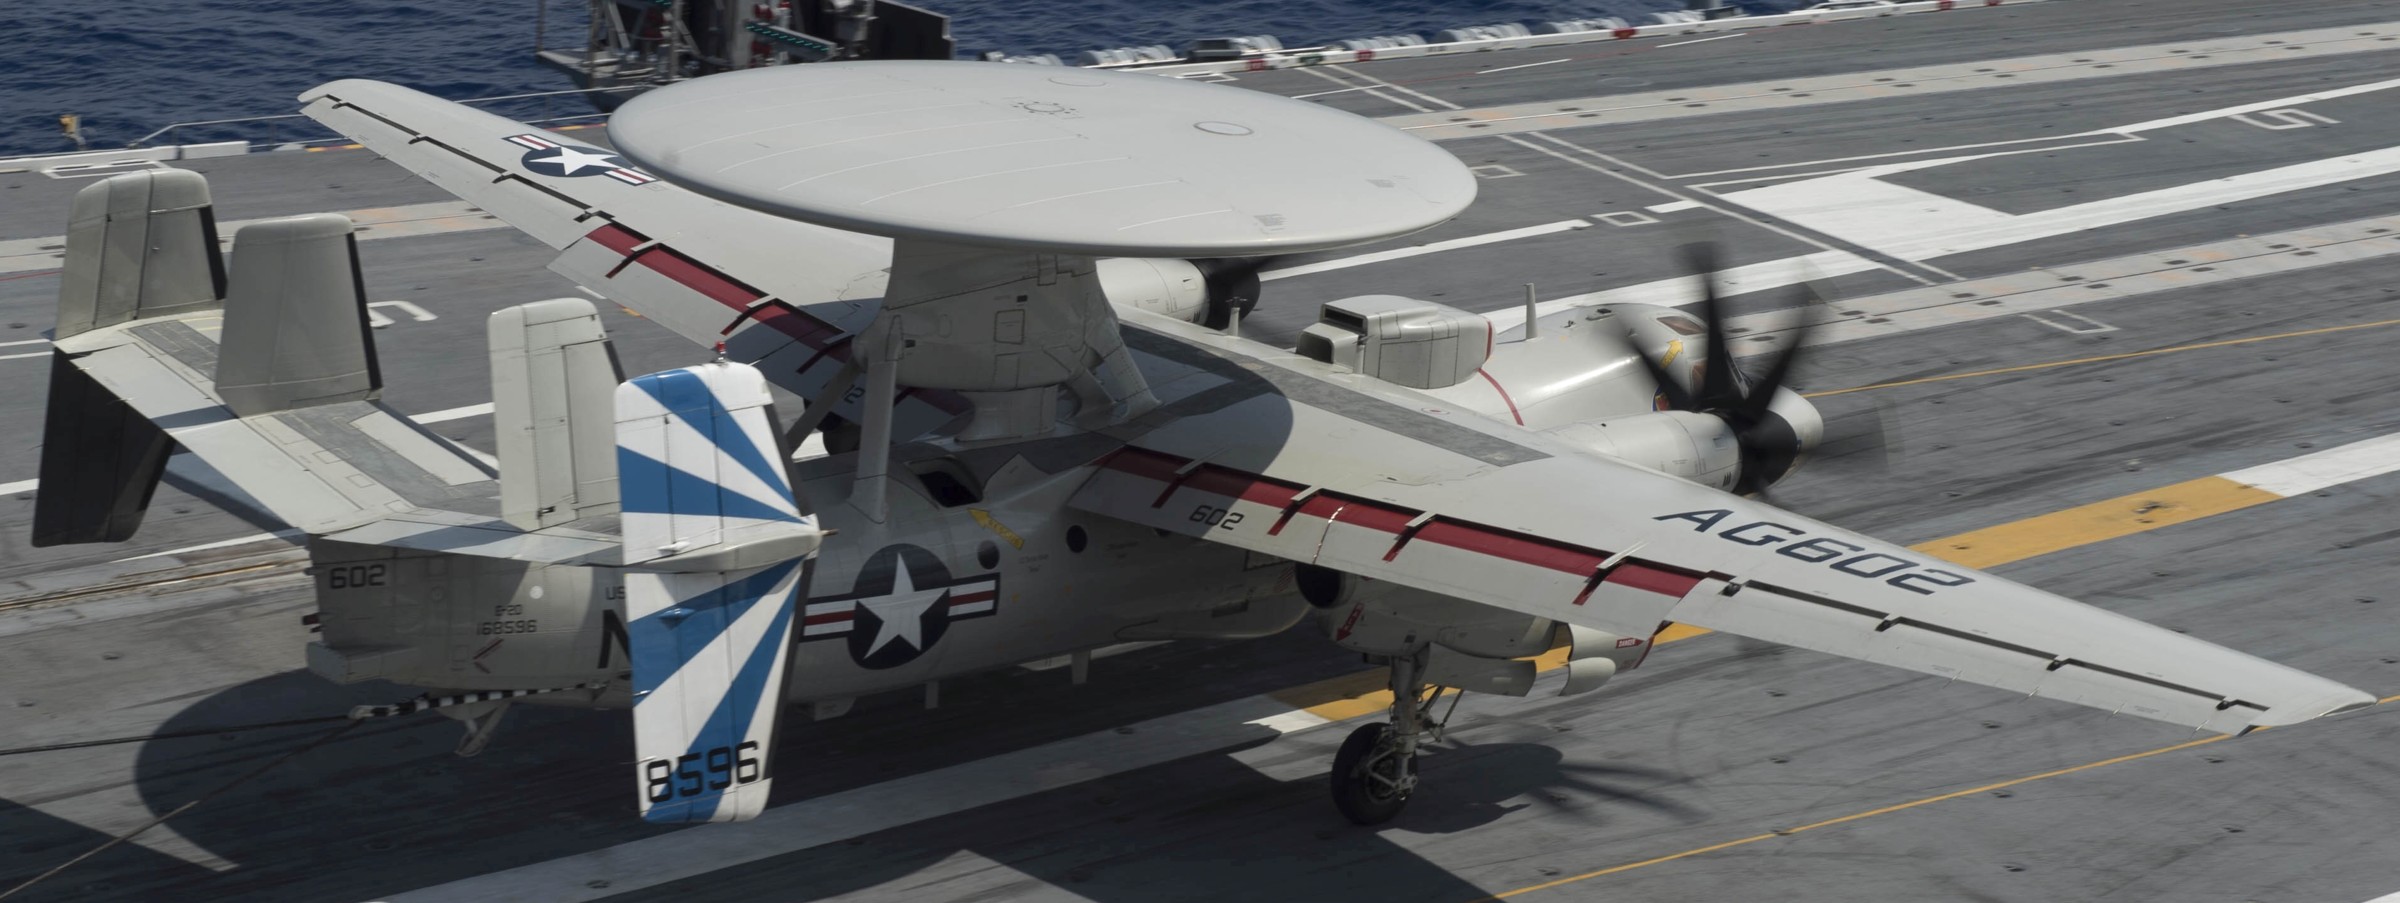 vaw-121 bluetails carrier airborne early warning squadron us navy e-2d advanced hawkeye cvw-7 uss abraham lincoln cvn-72 46